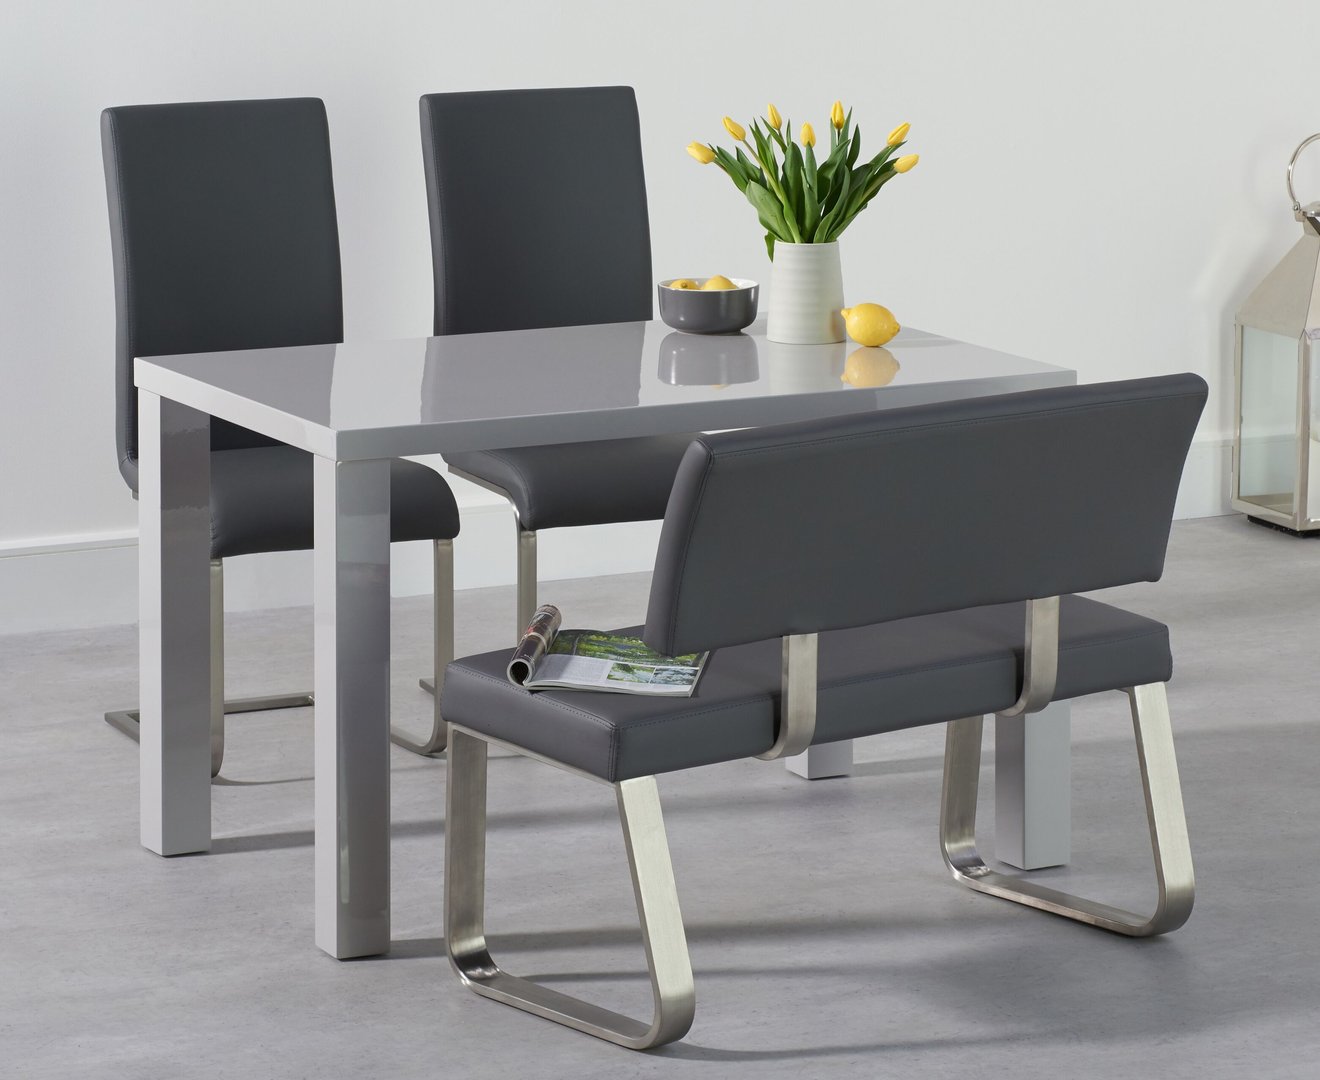 Grey High Gloss Dining Table Bench Set, Small Dining Table With 2 Chairs And Bench